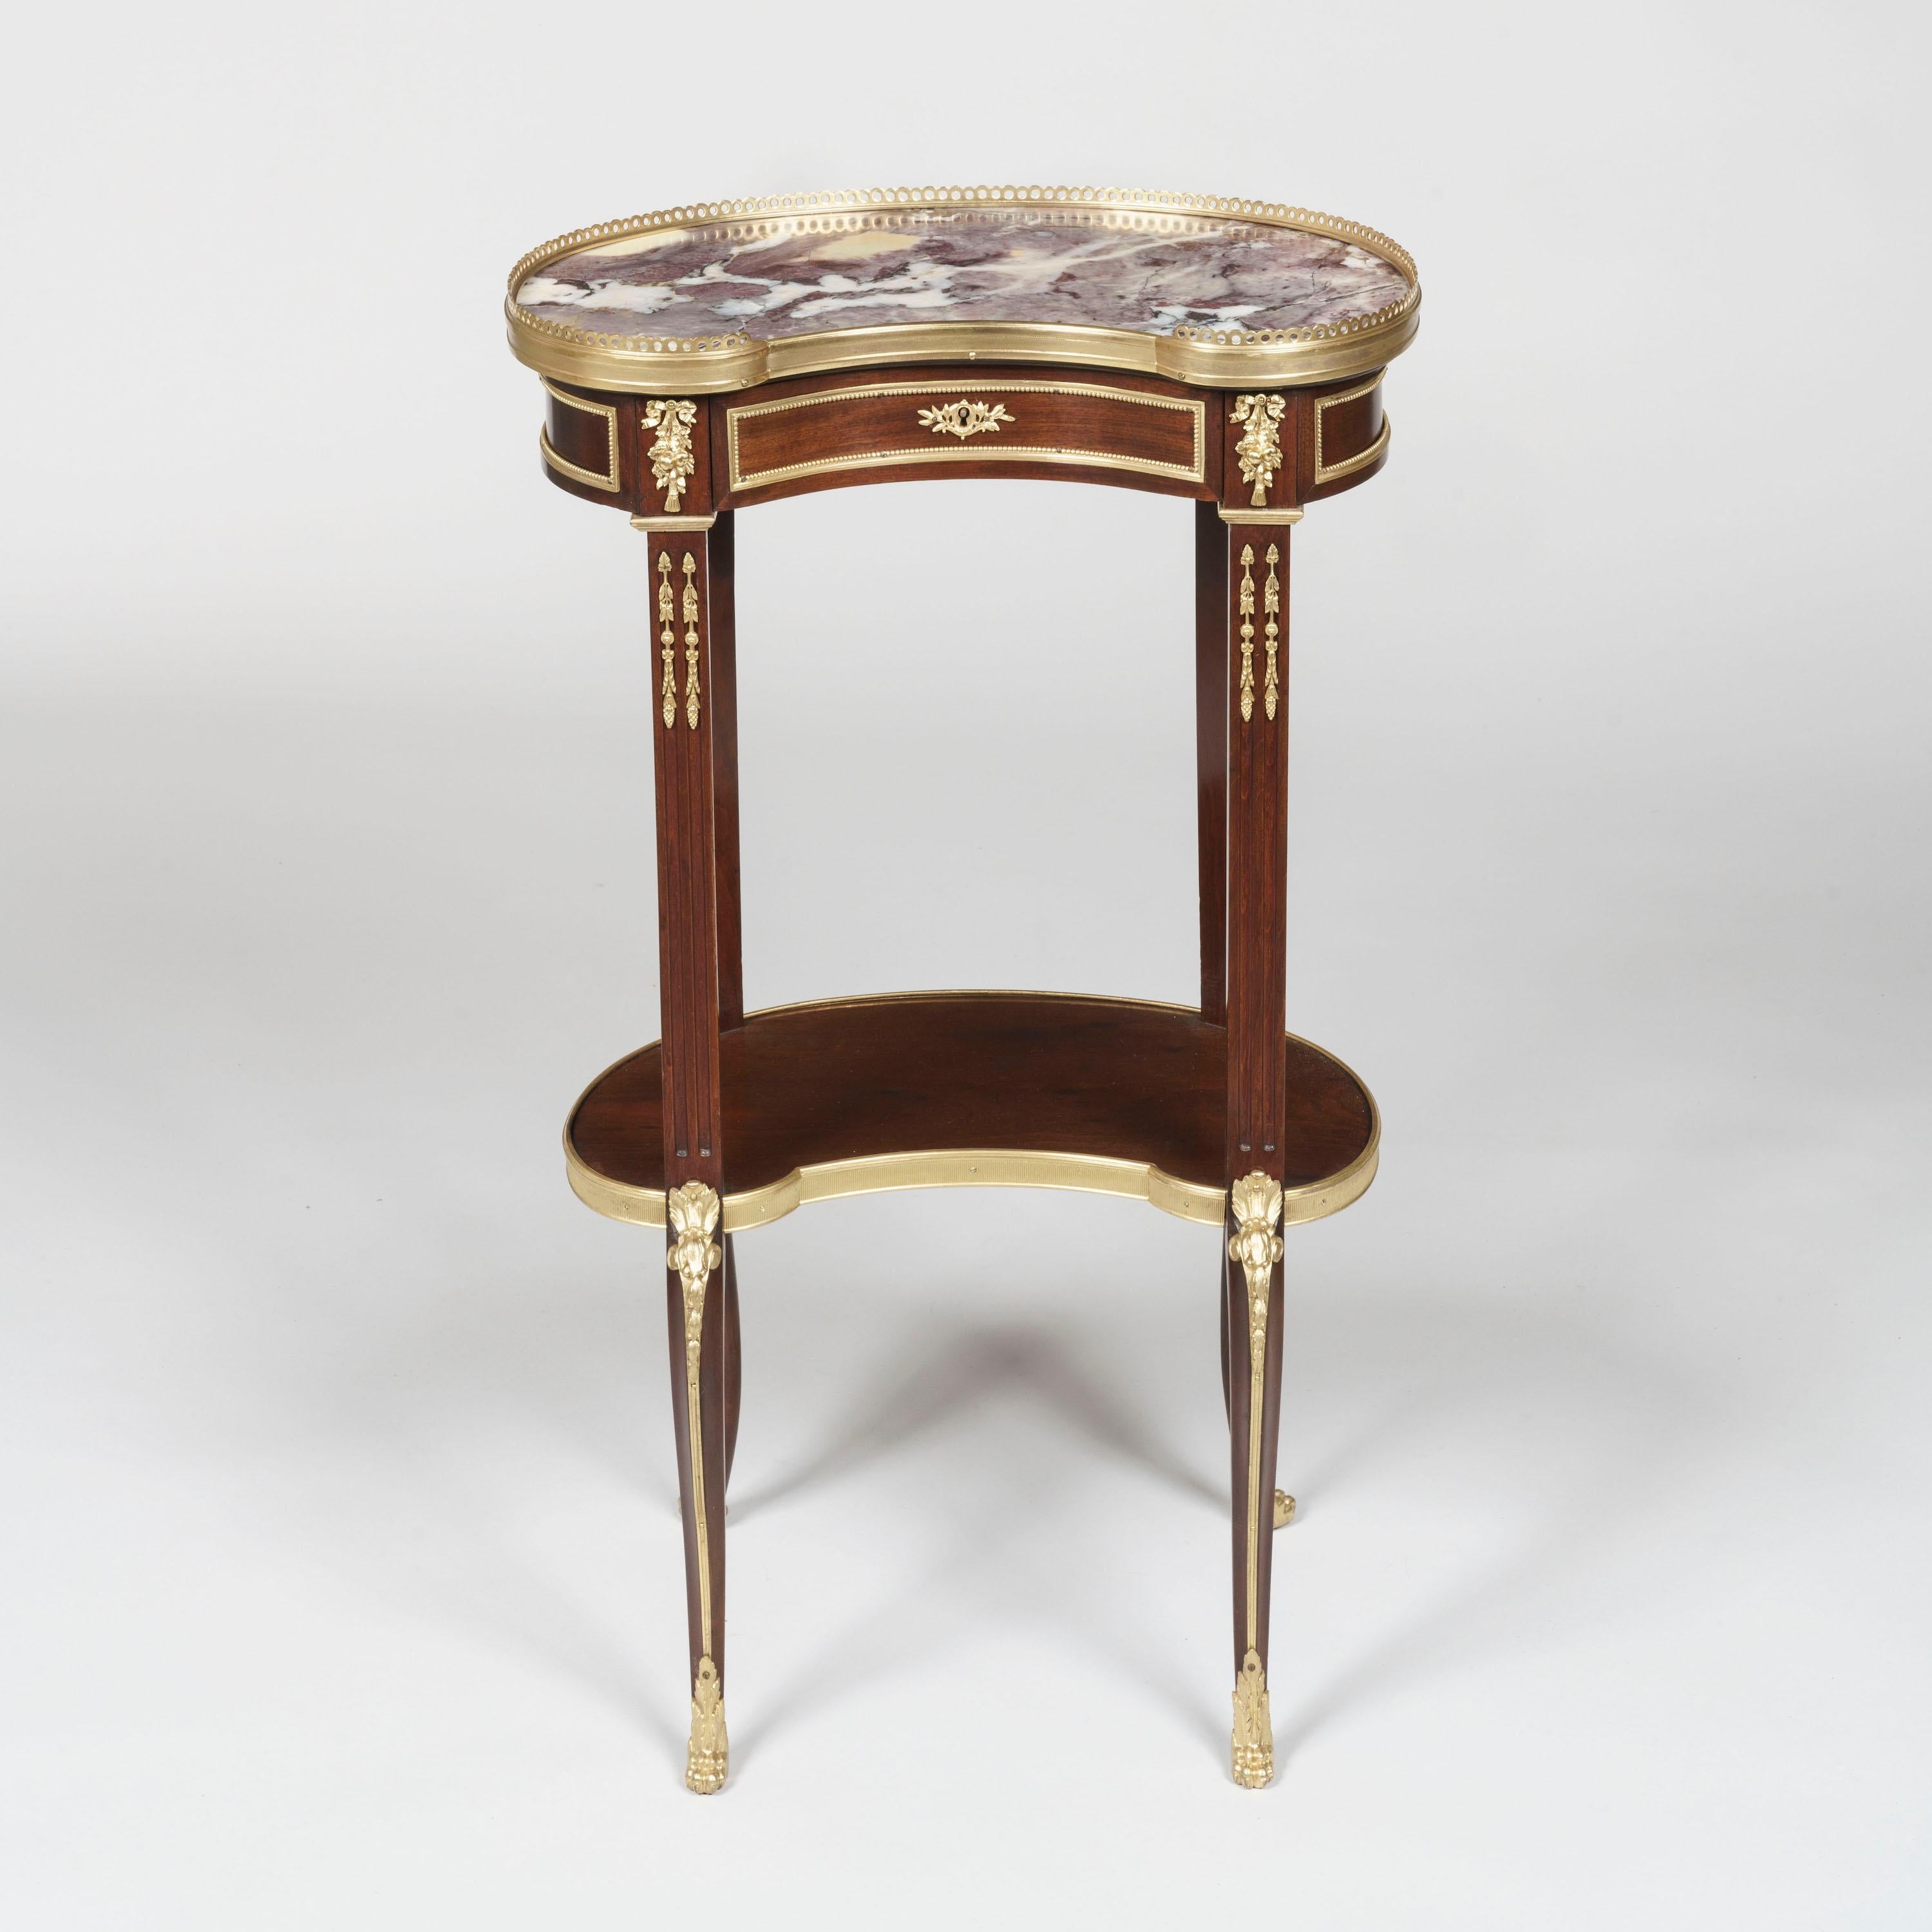 A pair of ormolu-mounted tables Ambulates
In the transitional style

The tables of kidney-shape and veneered with fine mahogany, supported on cabriole legs with lion's paw sabots and ormolu espagnolettes joined together by a shaped undertier, the